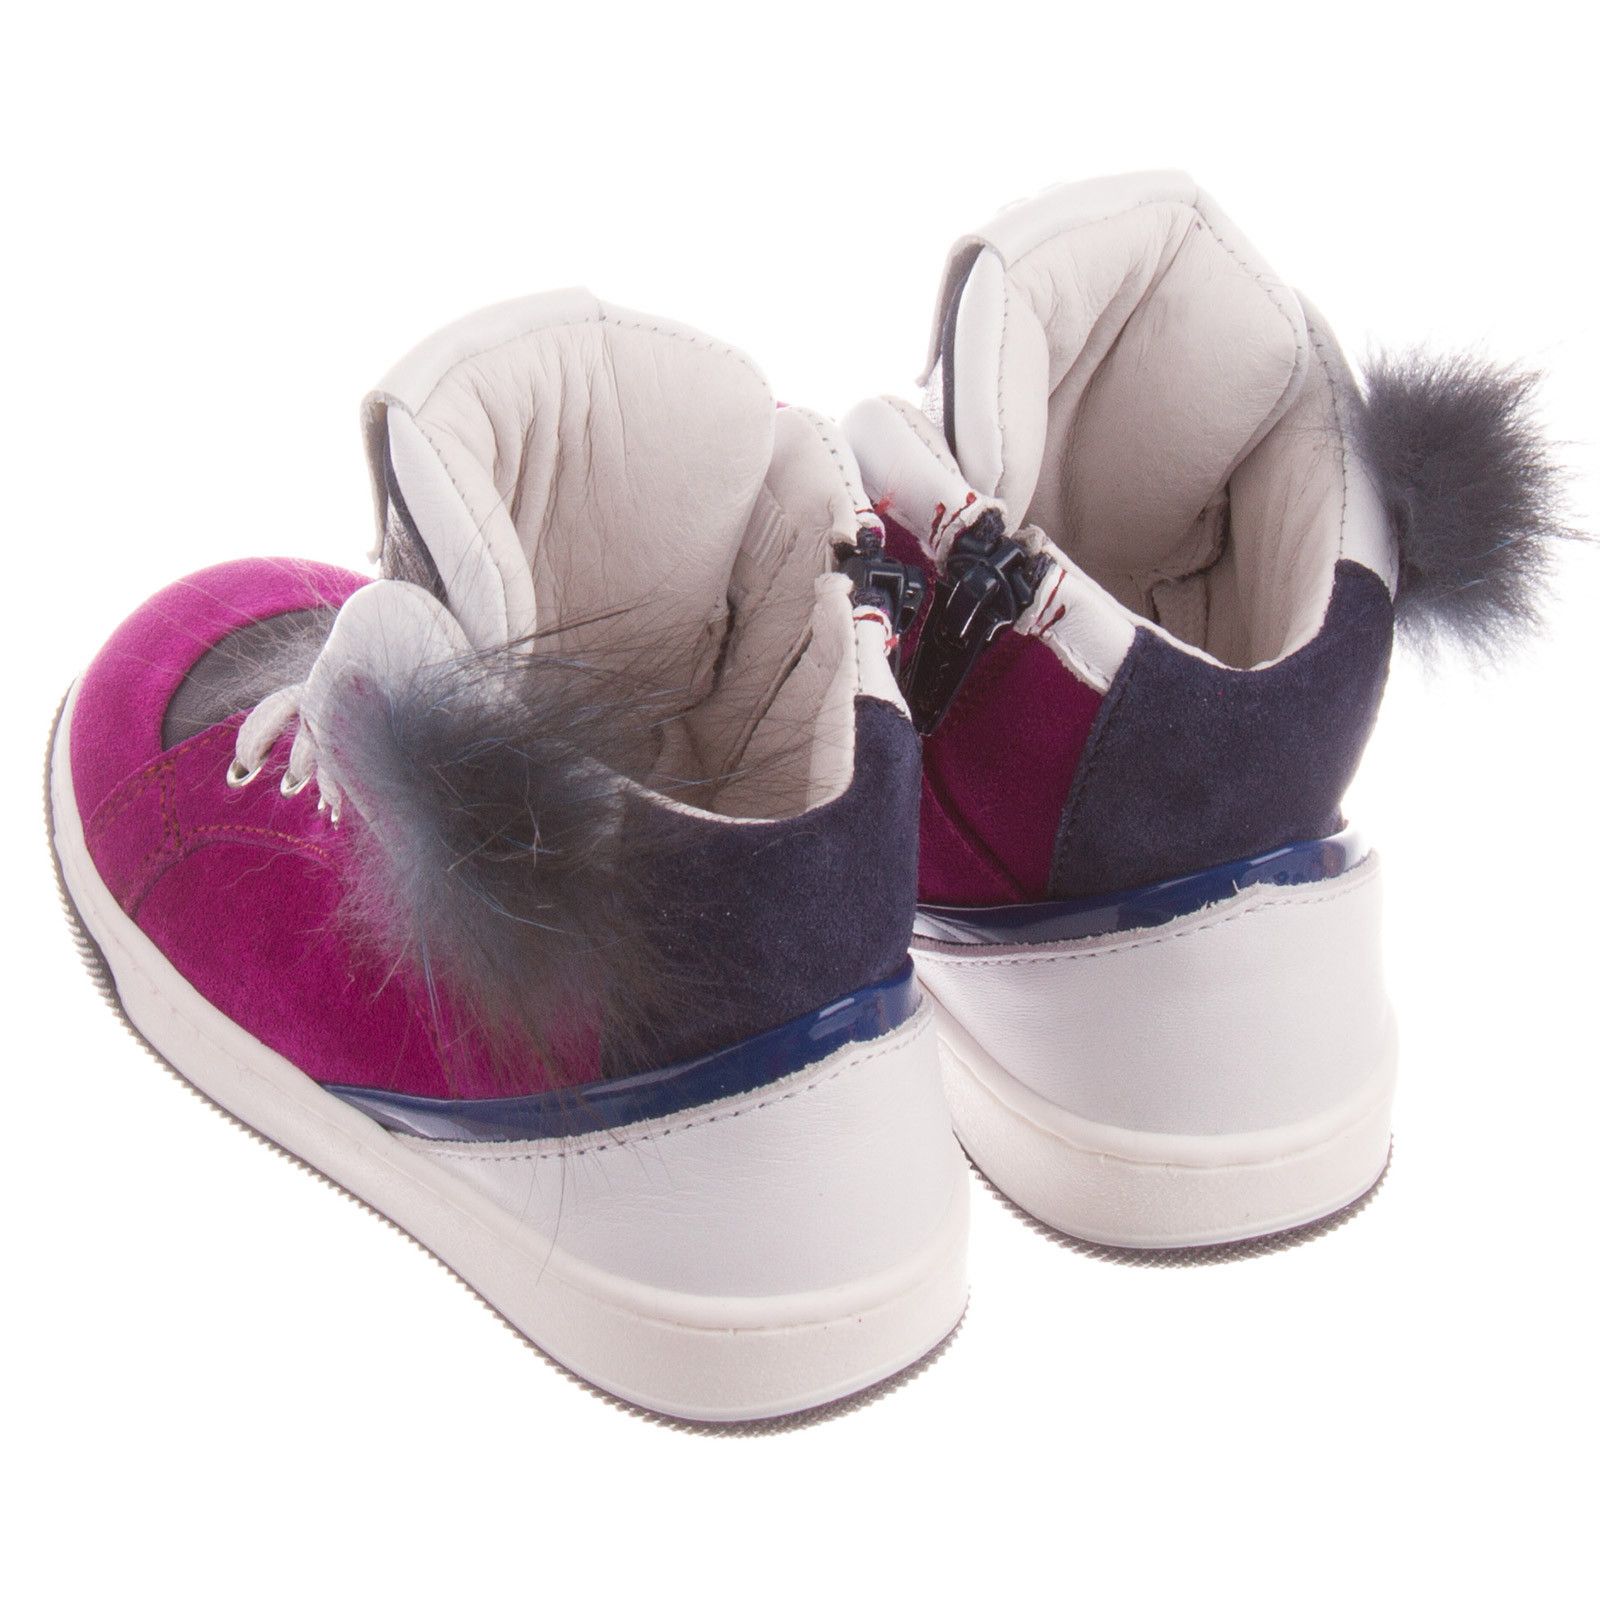 Boys&Girls Purple Suede High-top Trainers With Fur - CÉMAROSE | Children's Fashion Store - 4